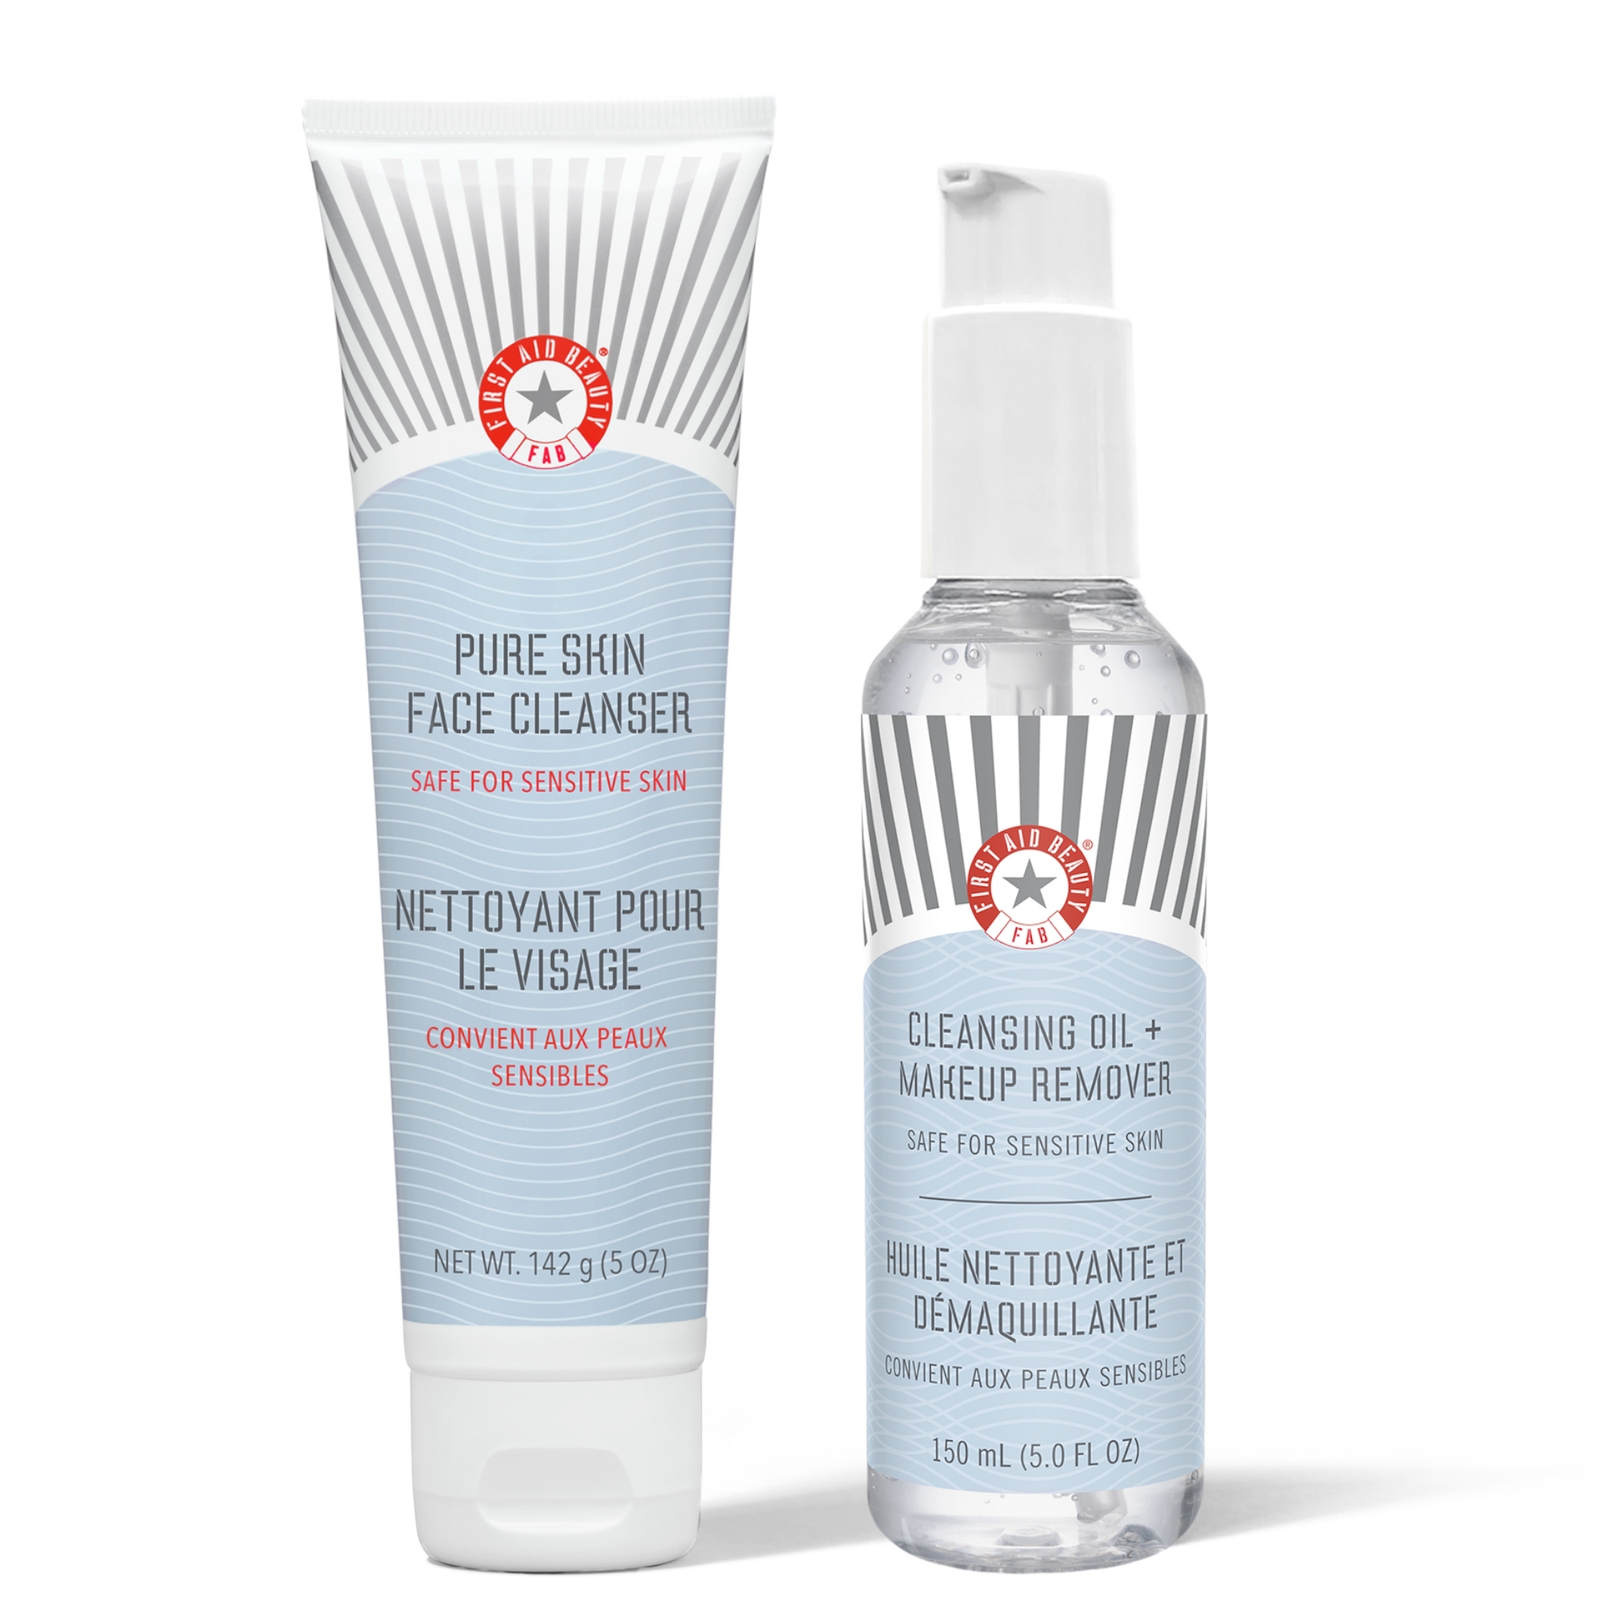 First Aid Beauty Double Cleanse Bundle ($50 Value) In White